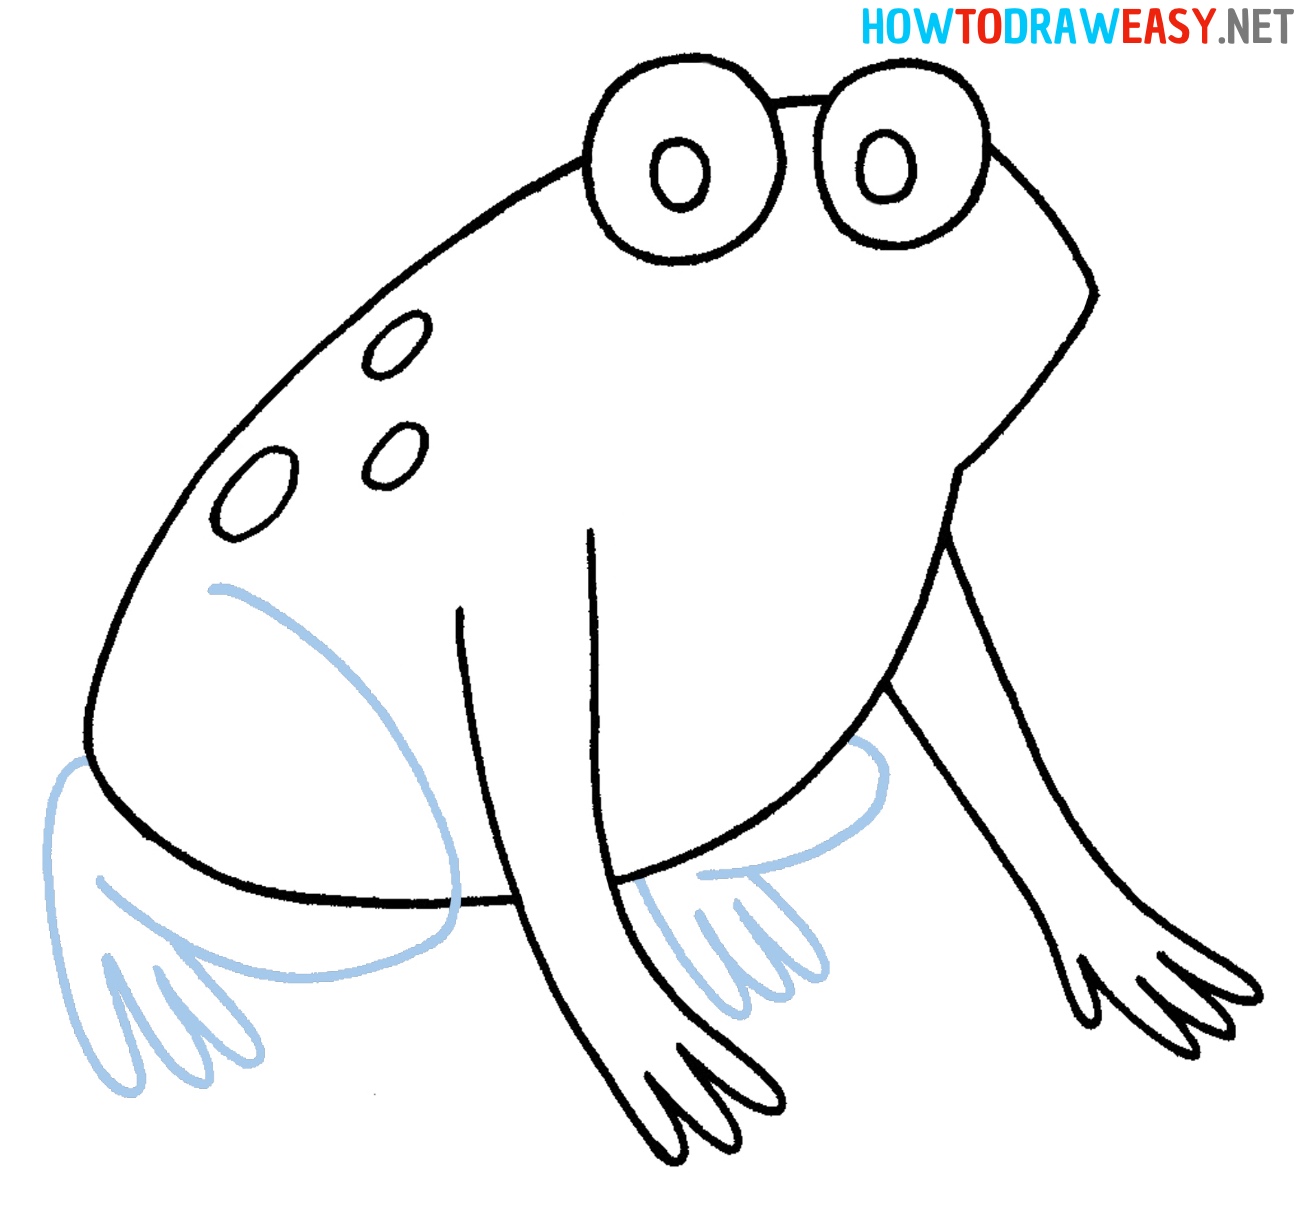 How to Sketch a Frog